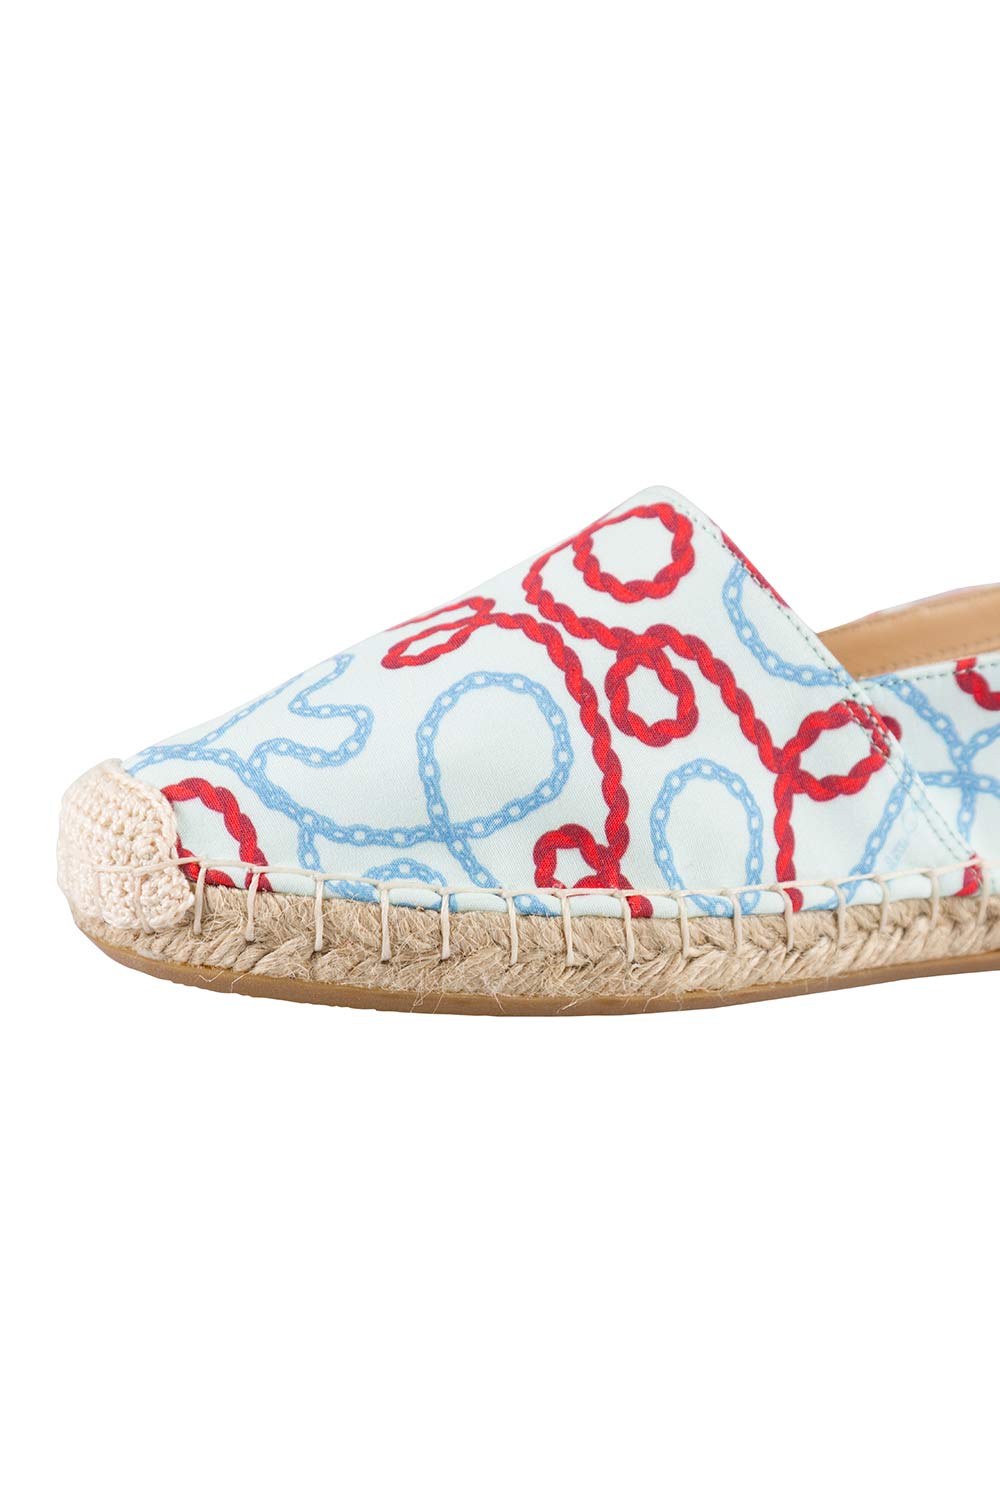 Charlotte Olympia Tricolor Printed Fabric Esme Espadrilles Size 38